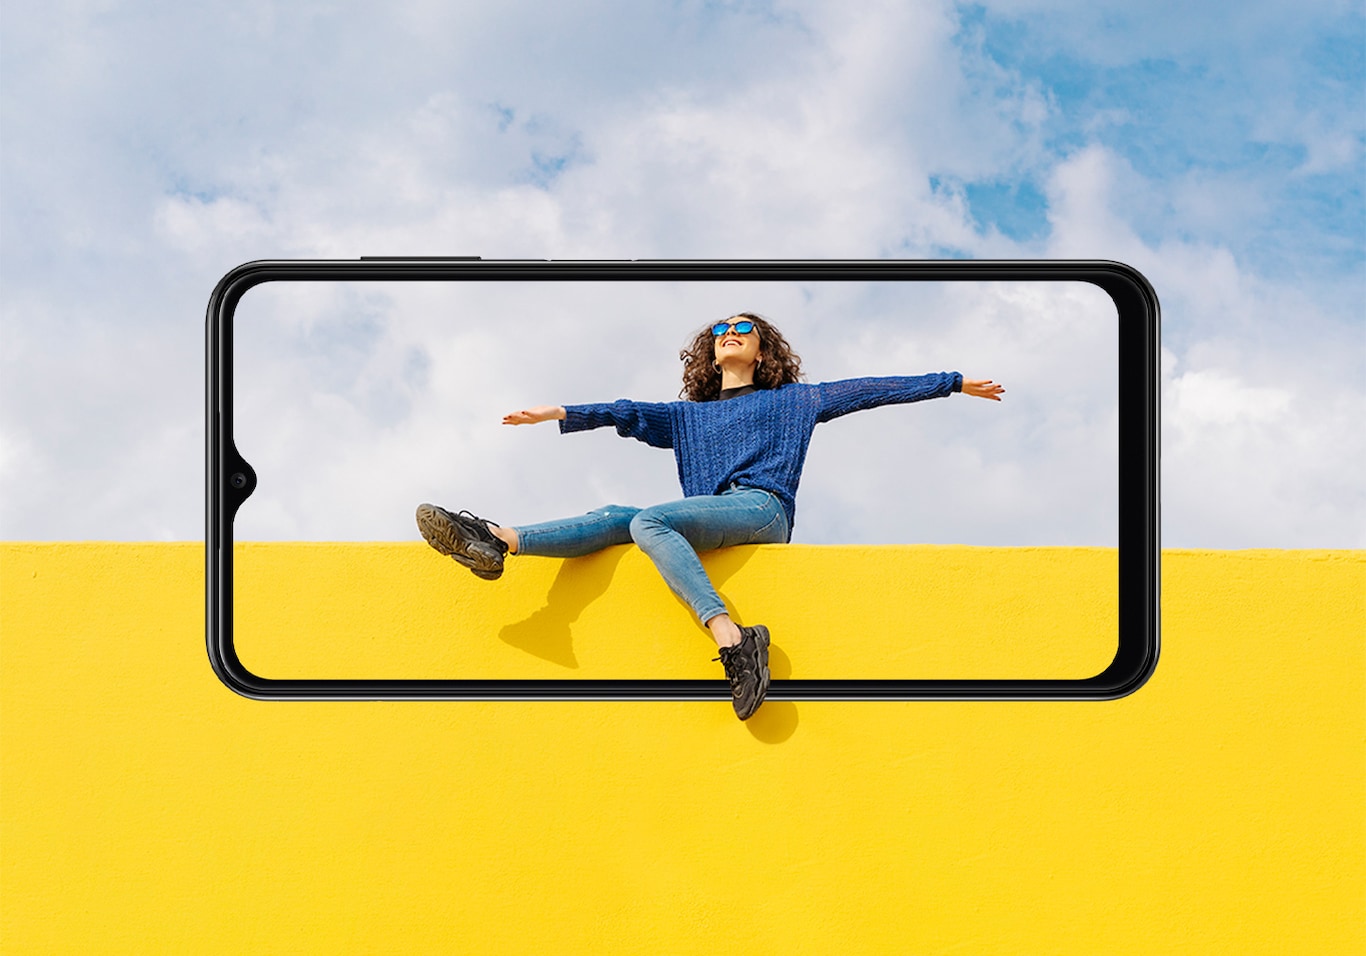 Keep a tab on the Samsung Galaxy A13 release date. Galaxy A13 seen from the front. A young woman sitting on yellow wall against cloudy sky looking up. Her legs and the wall and sky extend outside of the display.